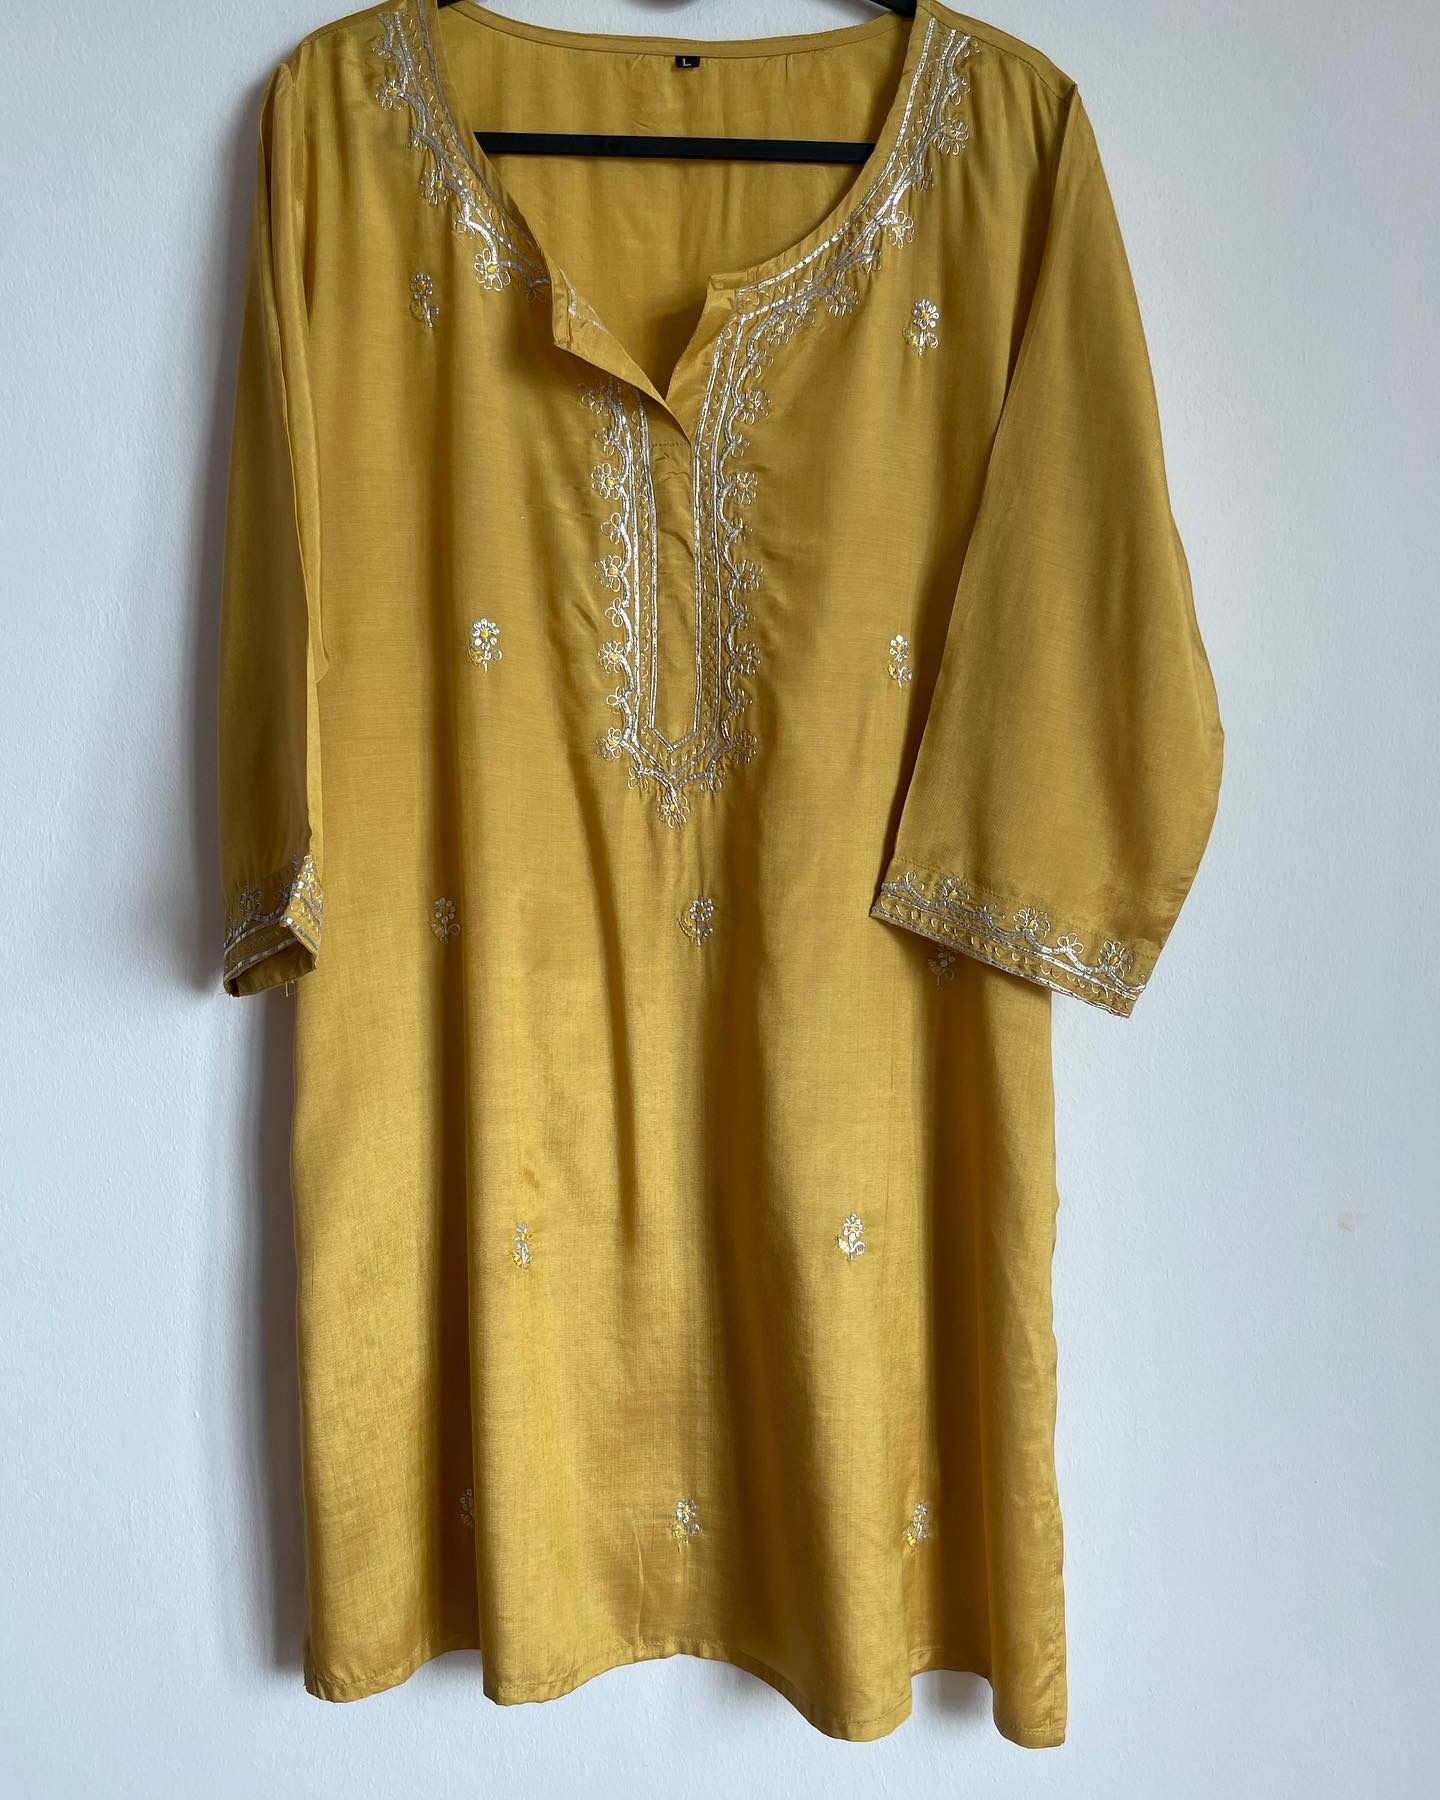 bright yellow indian ethnicwear for women, with embroidery. High quality